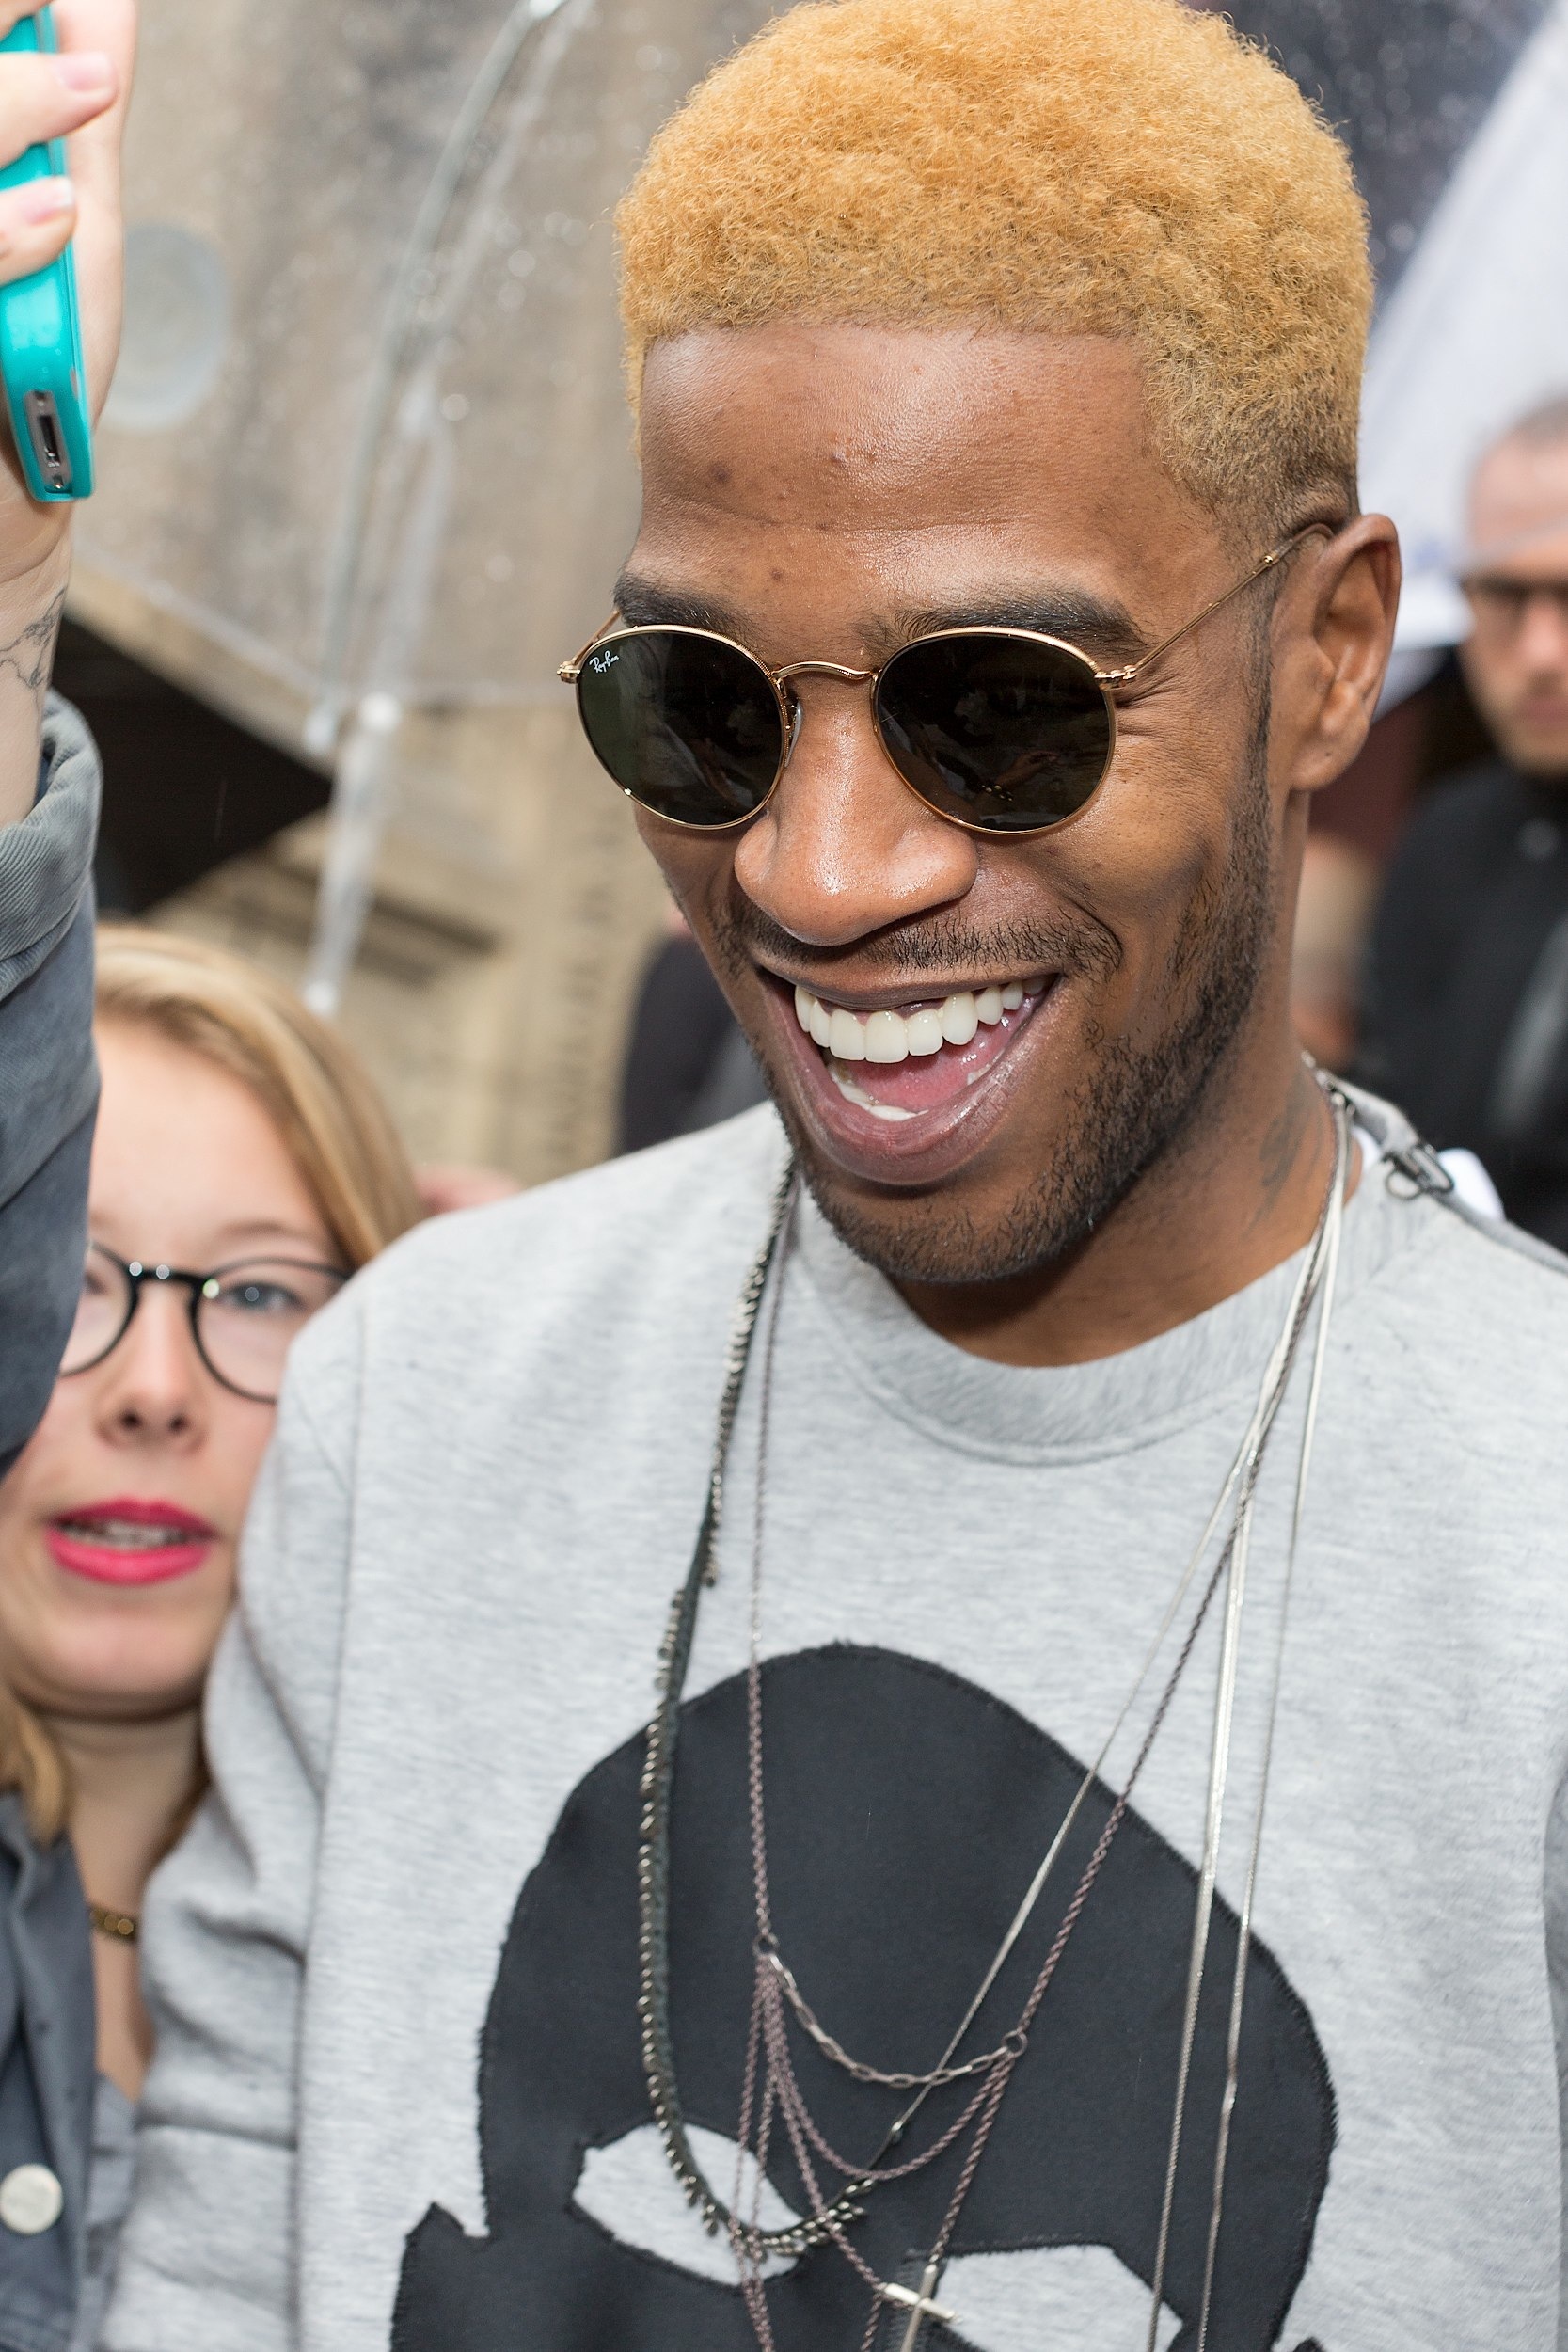 Kid Cudi has been battling depression for a while (Photo credit: Splash News)